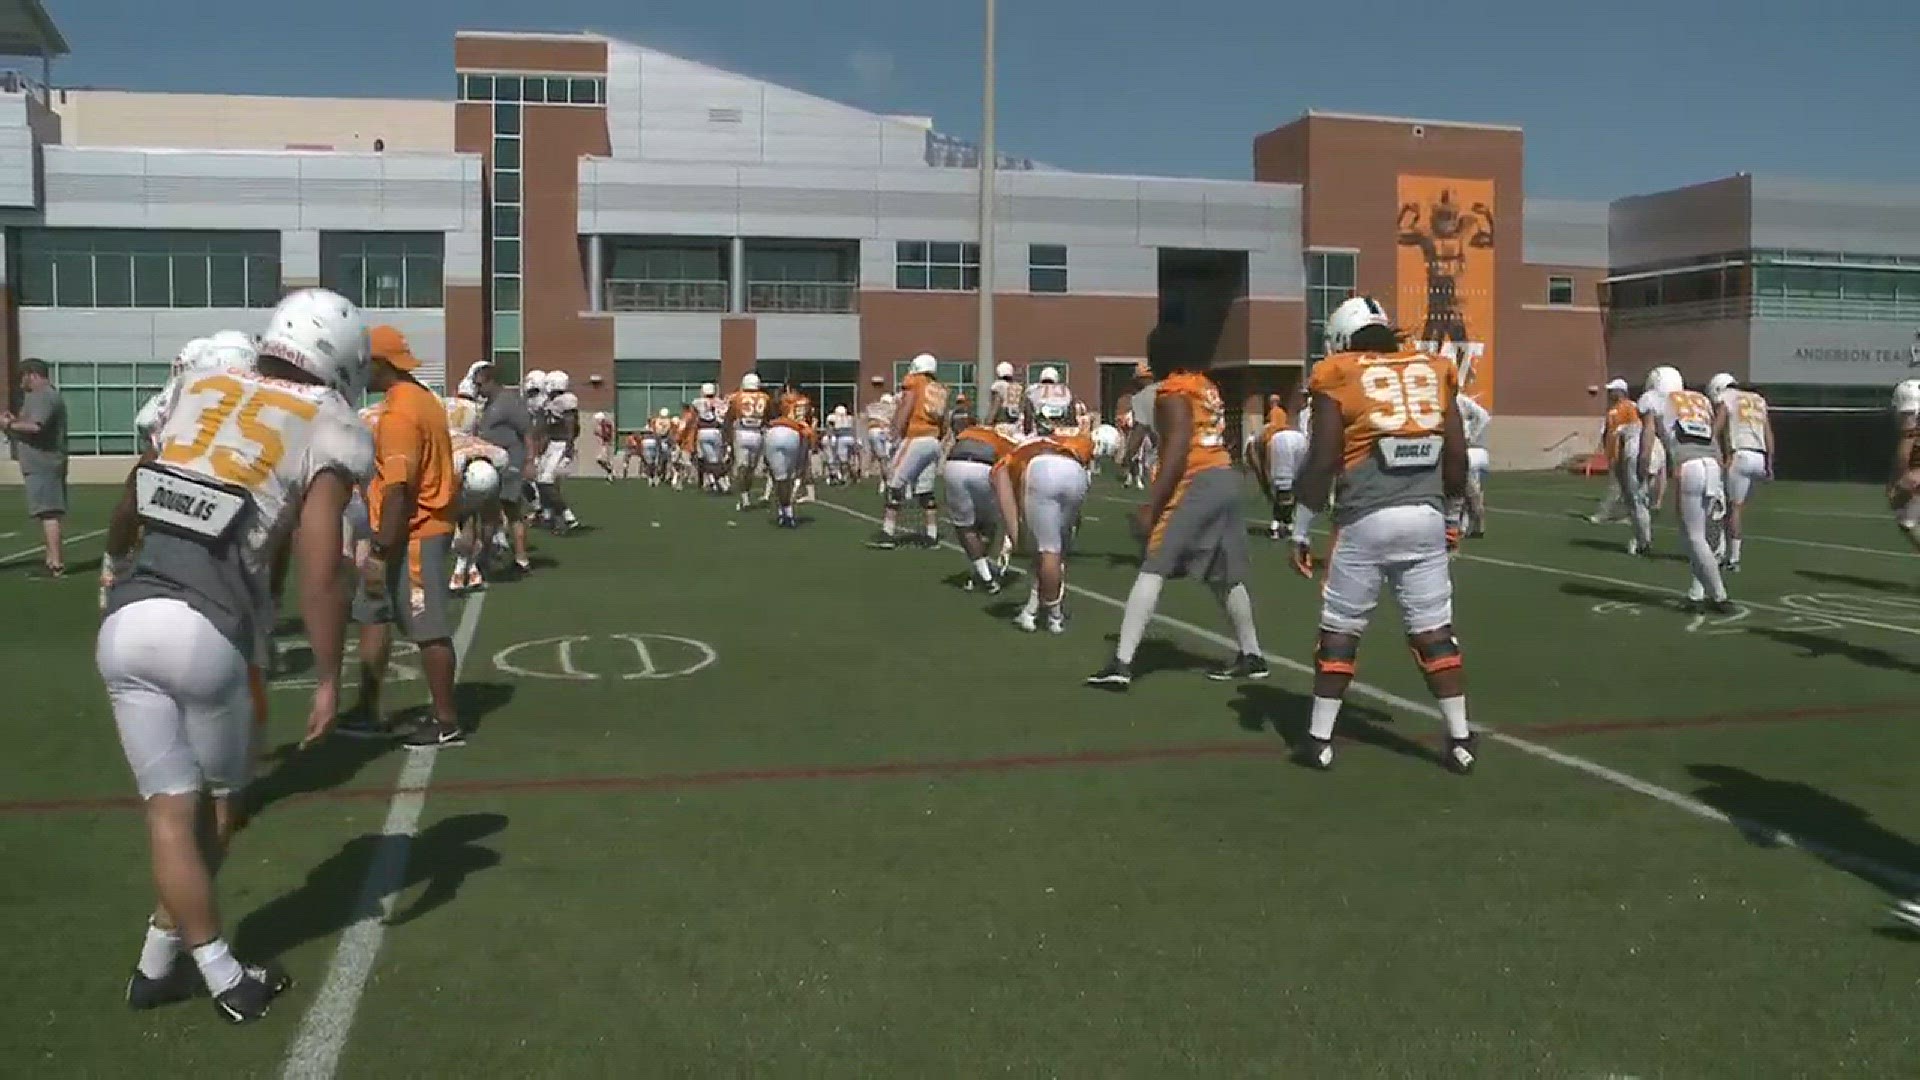 The sights and sounds from Tennessee Volunteers football practice on Tuesday, April 11, 2017.